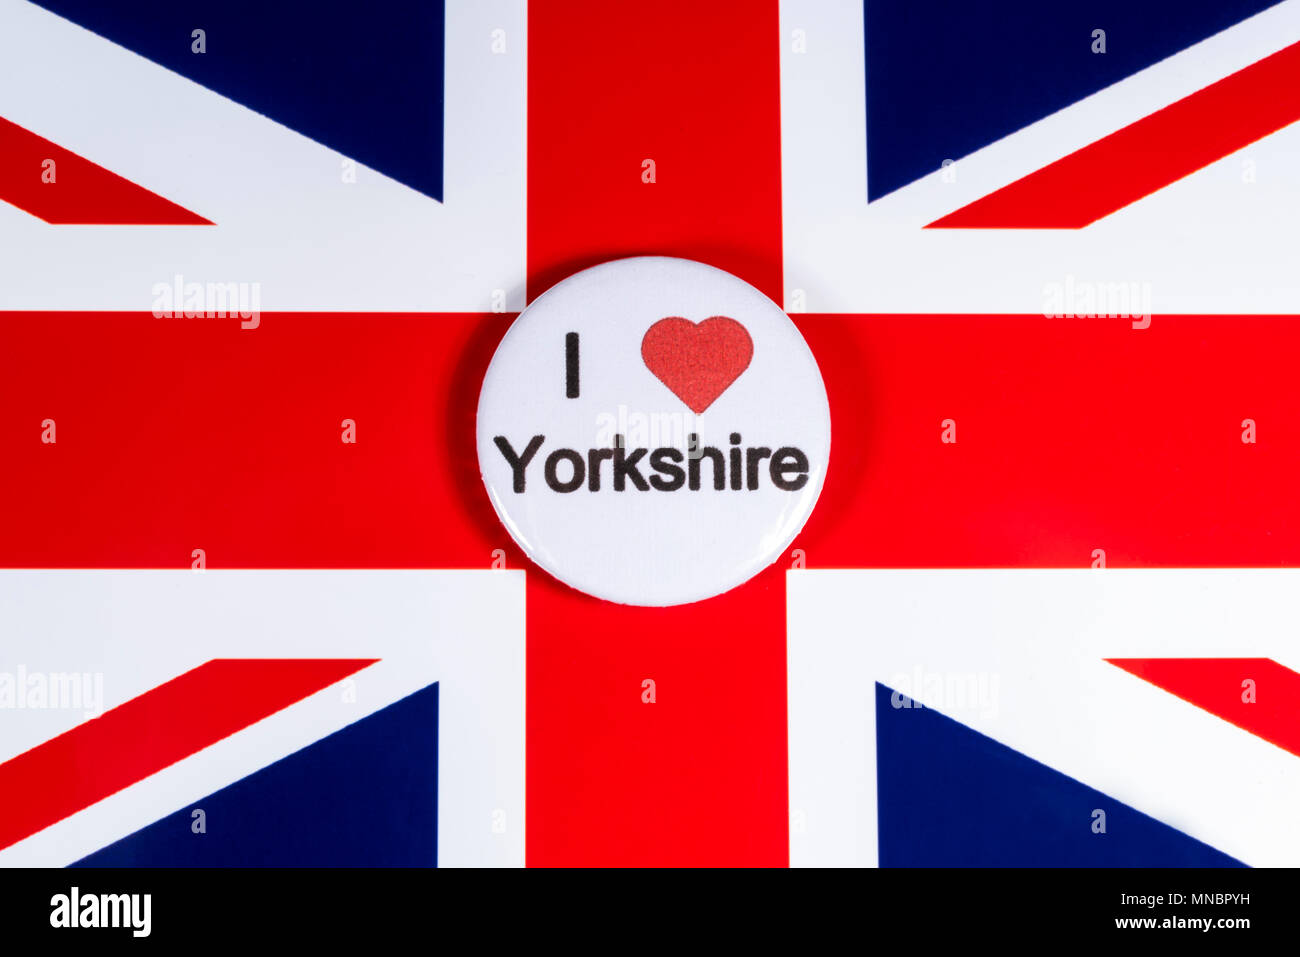 LONDON, UK - APRIL 27TH 2018: An I Love Yorkshire badge pictured over the UK flag, on 27th April 2018. Stock Photo